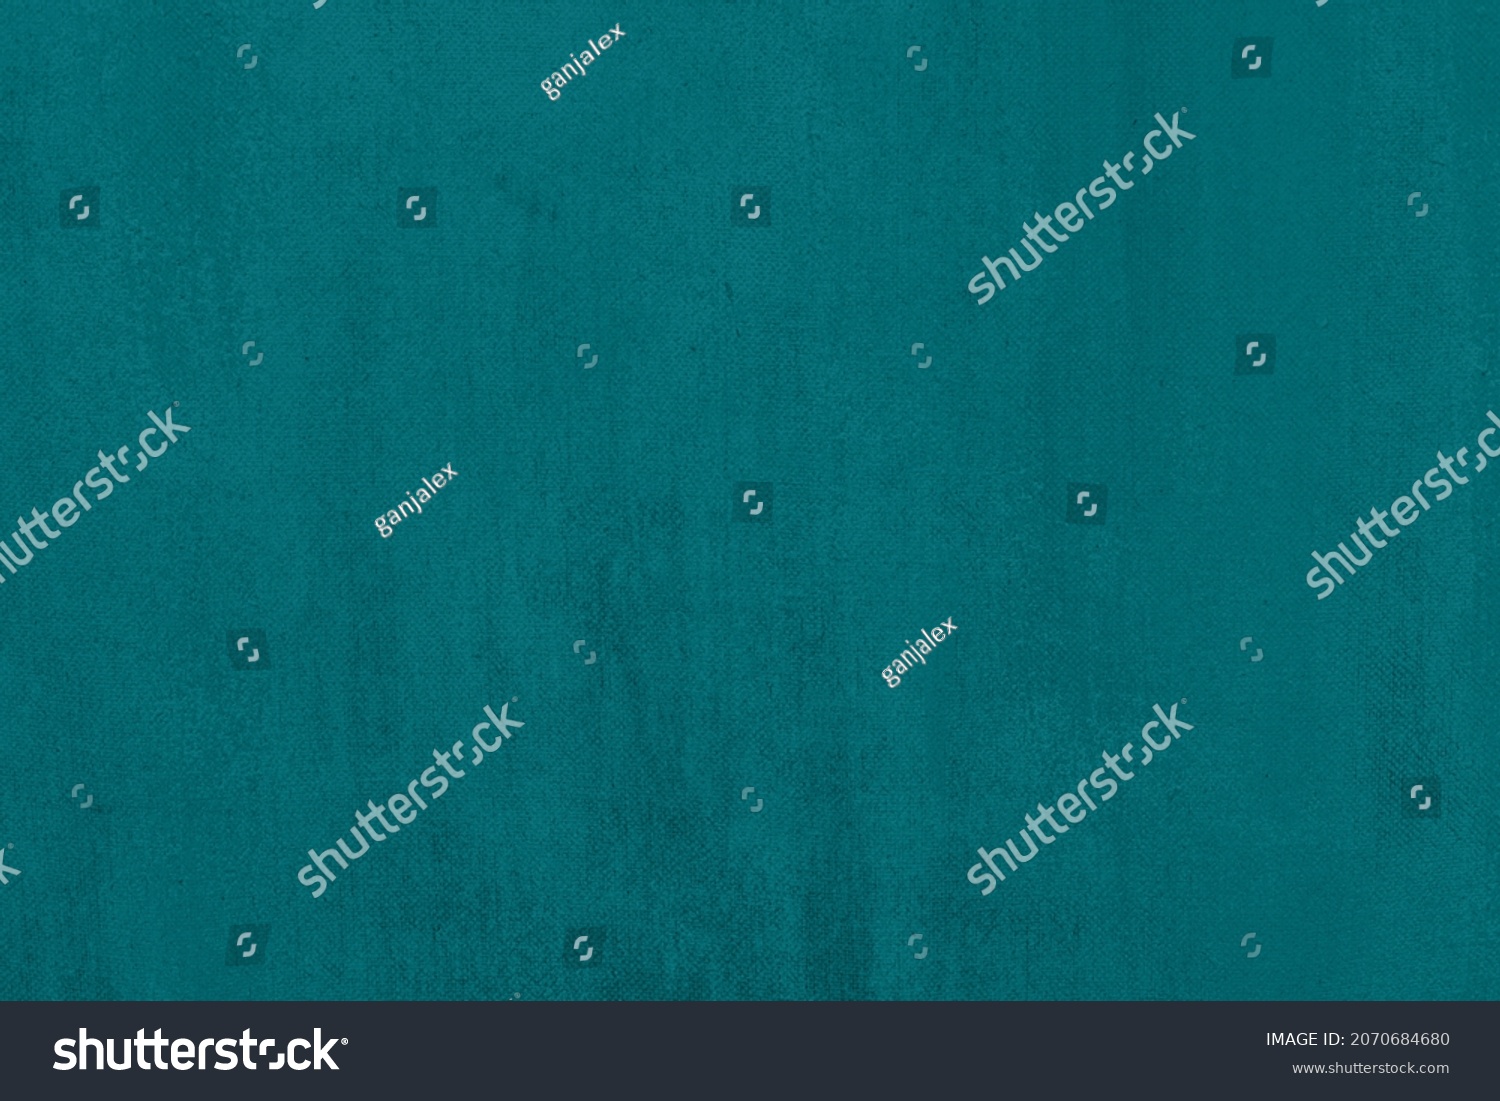 Teal green solid colored abstract painted canvas texture. Vintage grunge background elegant design. Year color concept #2070684680